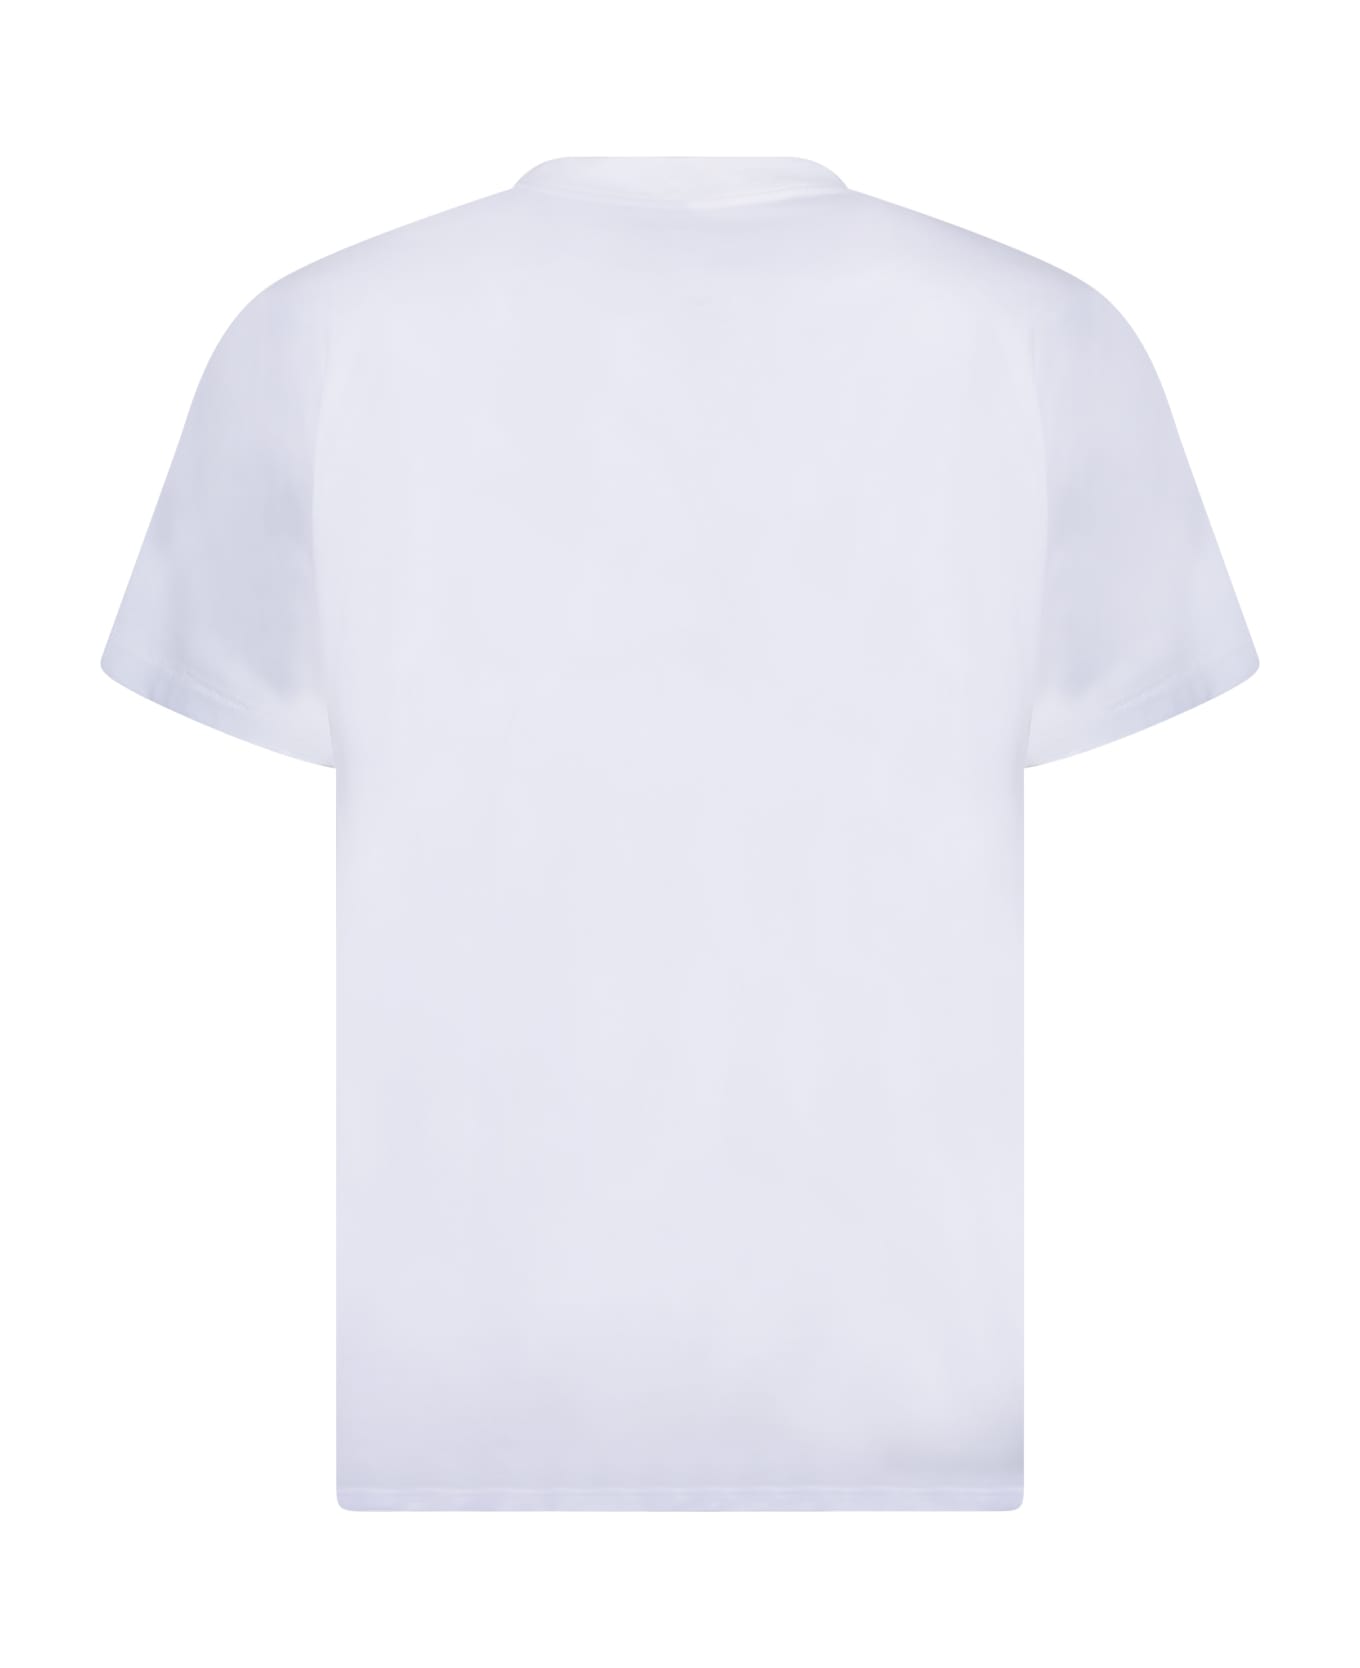 The Salvages Black Reconstructed T-shirt - White